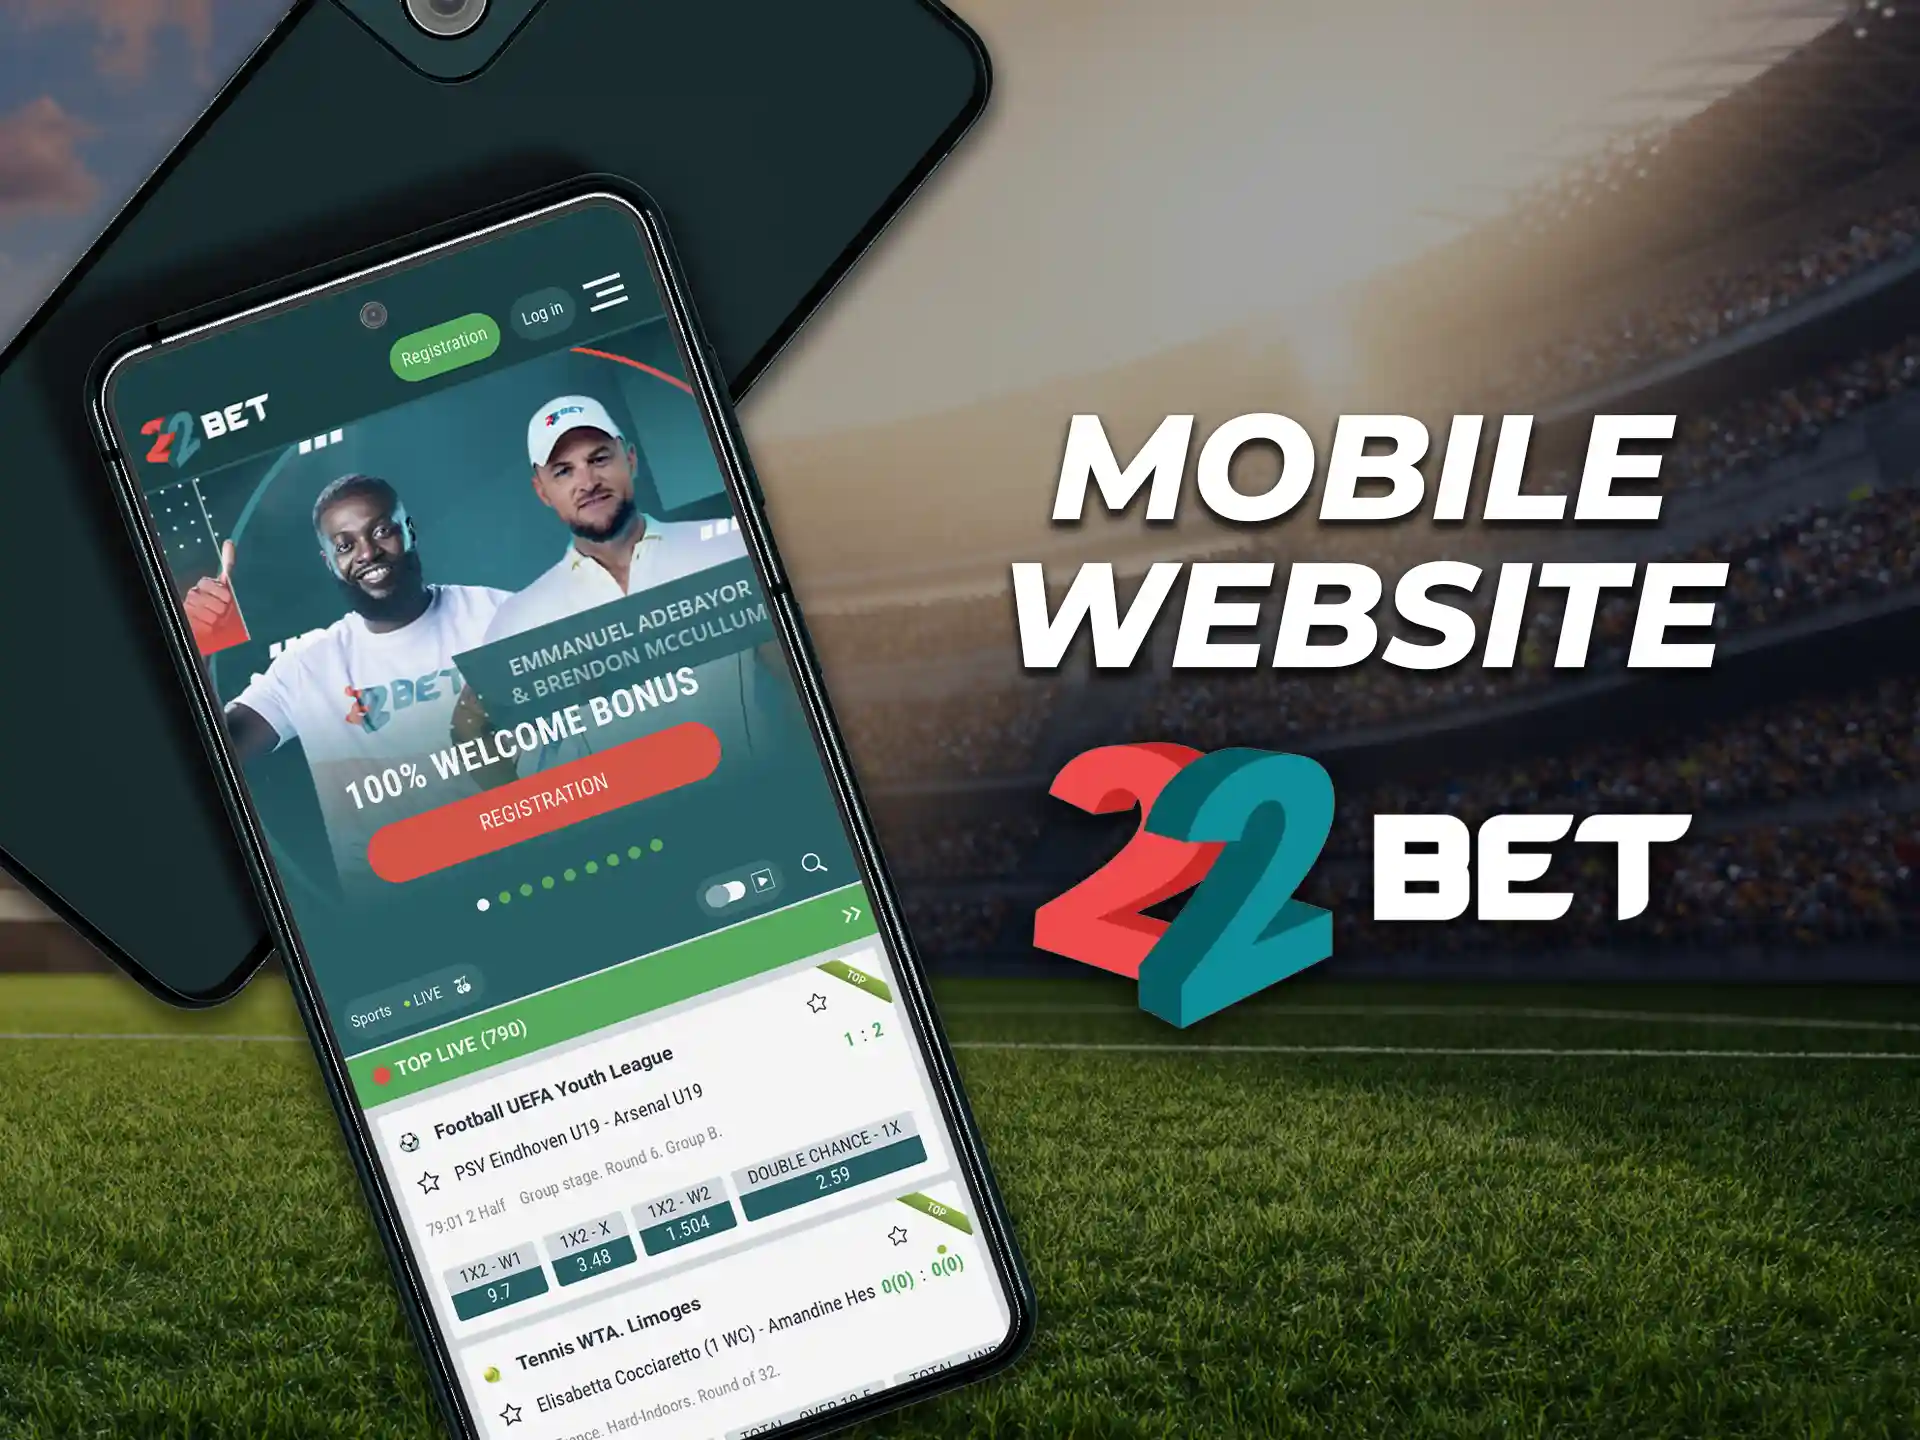 22Bet's mobile site can be accessed from any mobile device browser.